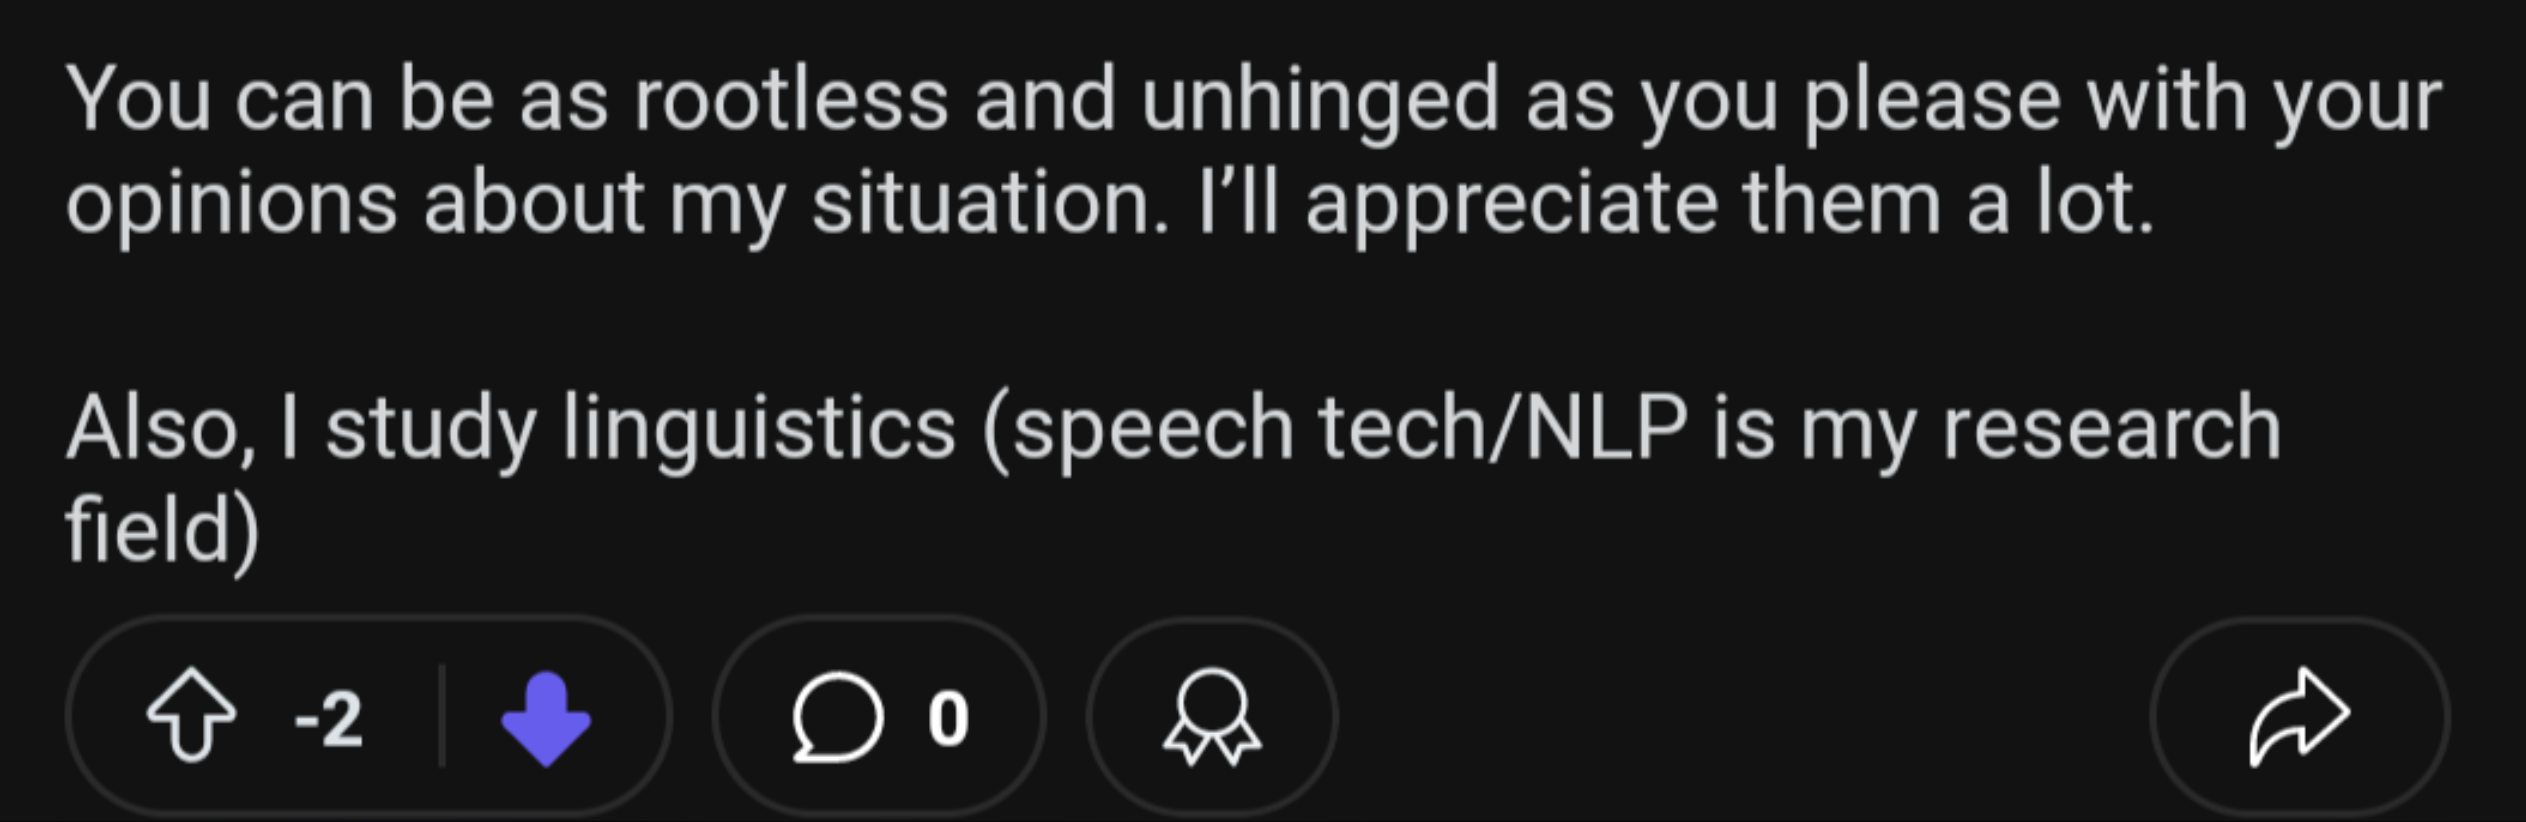 screenshot - You can be as rootless and unhinged as you please with your opinions about my situation. I'll appreciate them a lot. Also, I study linguistics speech techNlp is my research field 2 0